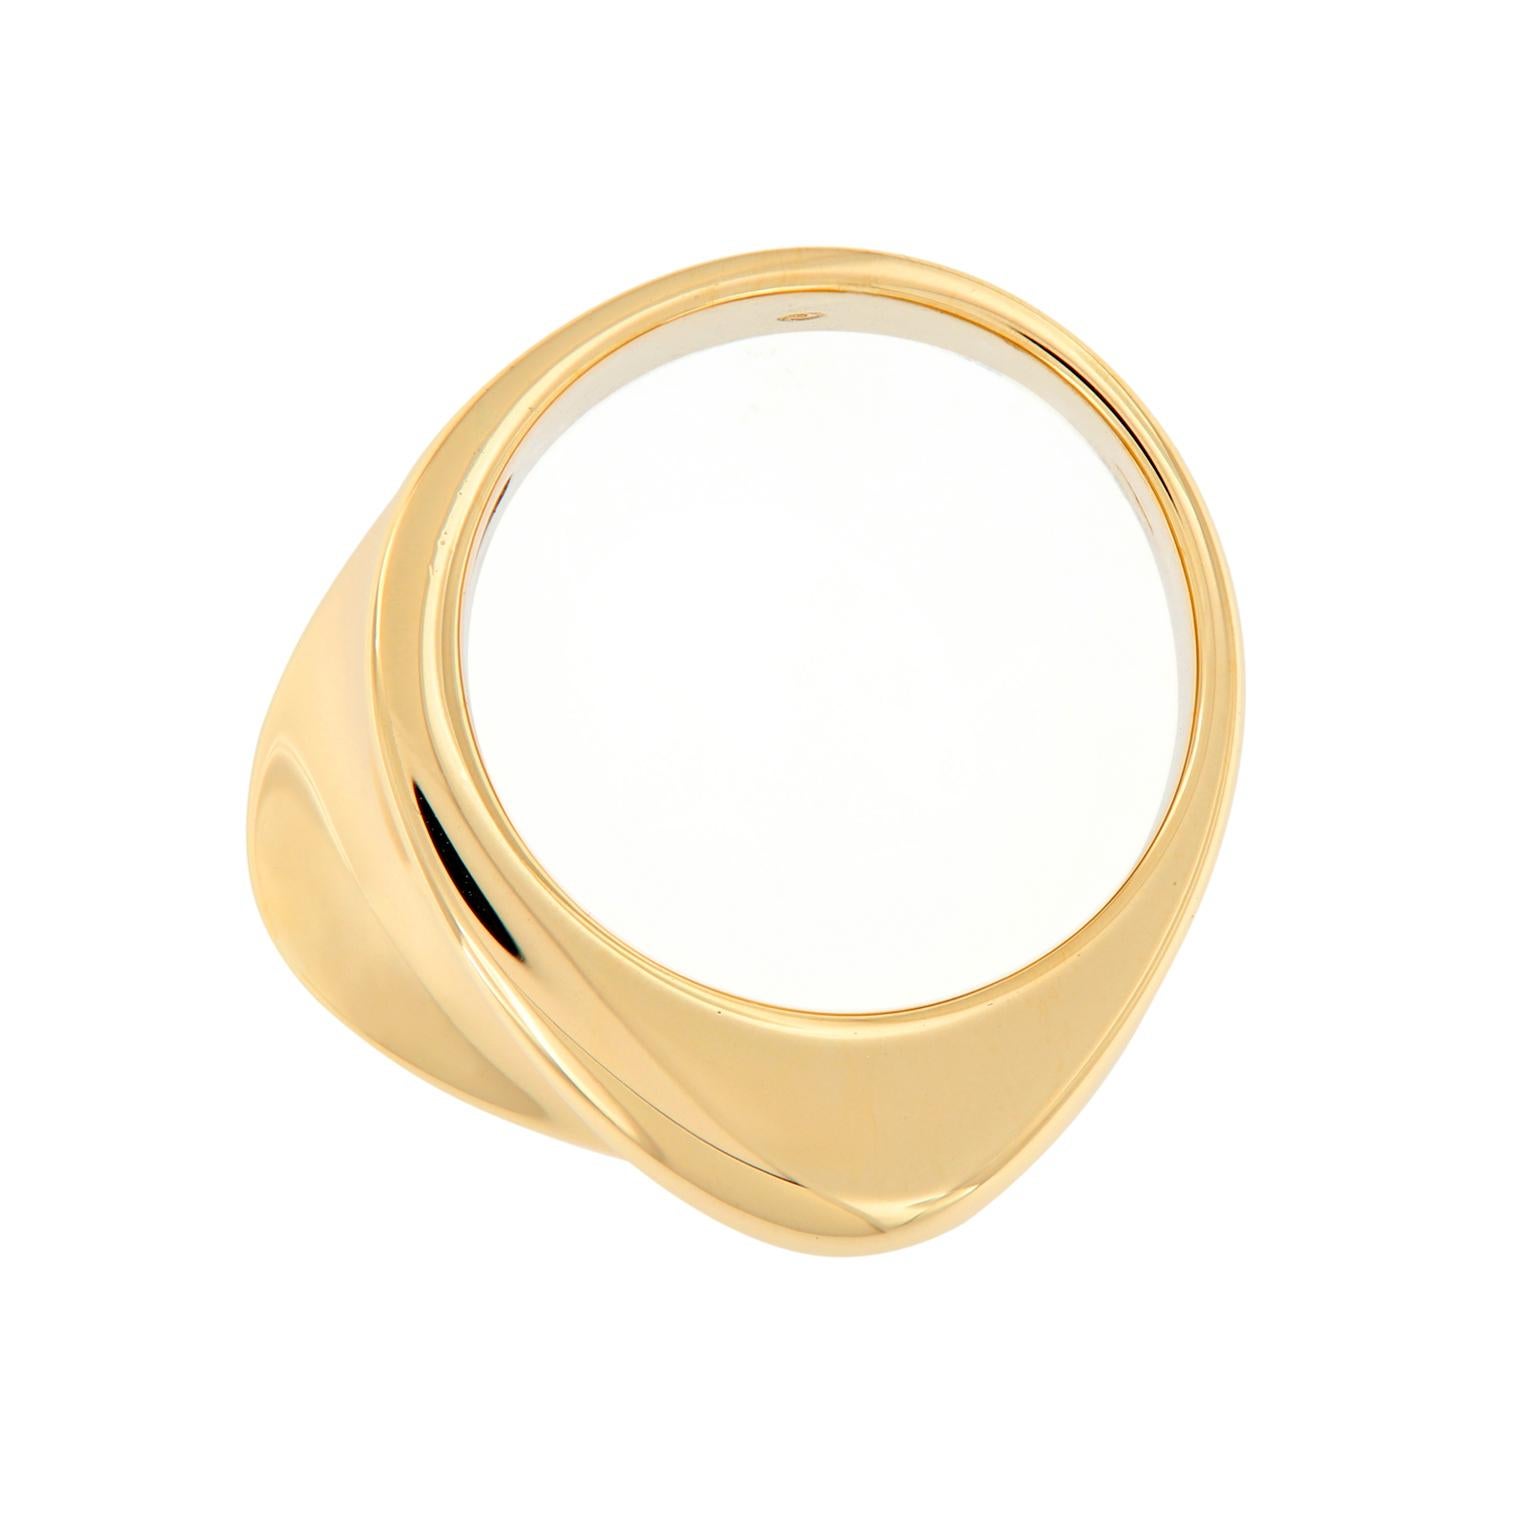 This wide band ring is a soft-looking shape that is unobtrusive, yet has a pleasing quality. Ring is expertly crafted in 18k yellow gold by Scheffel of Germany. Ring Size 7.

Marked Scheffel